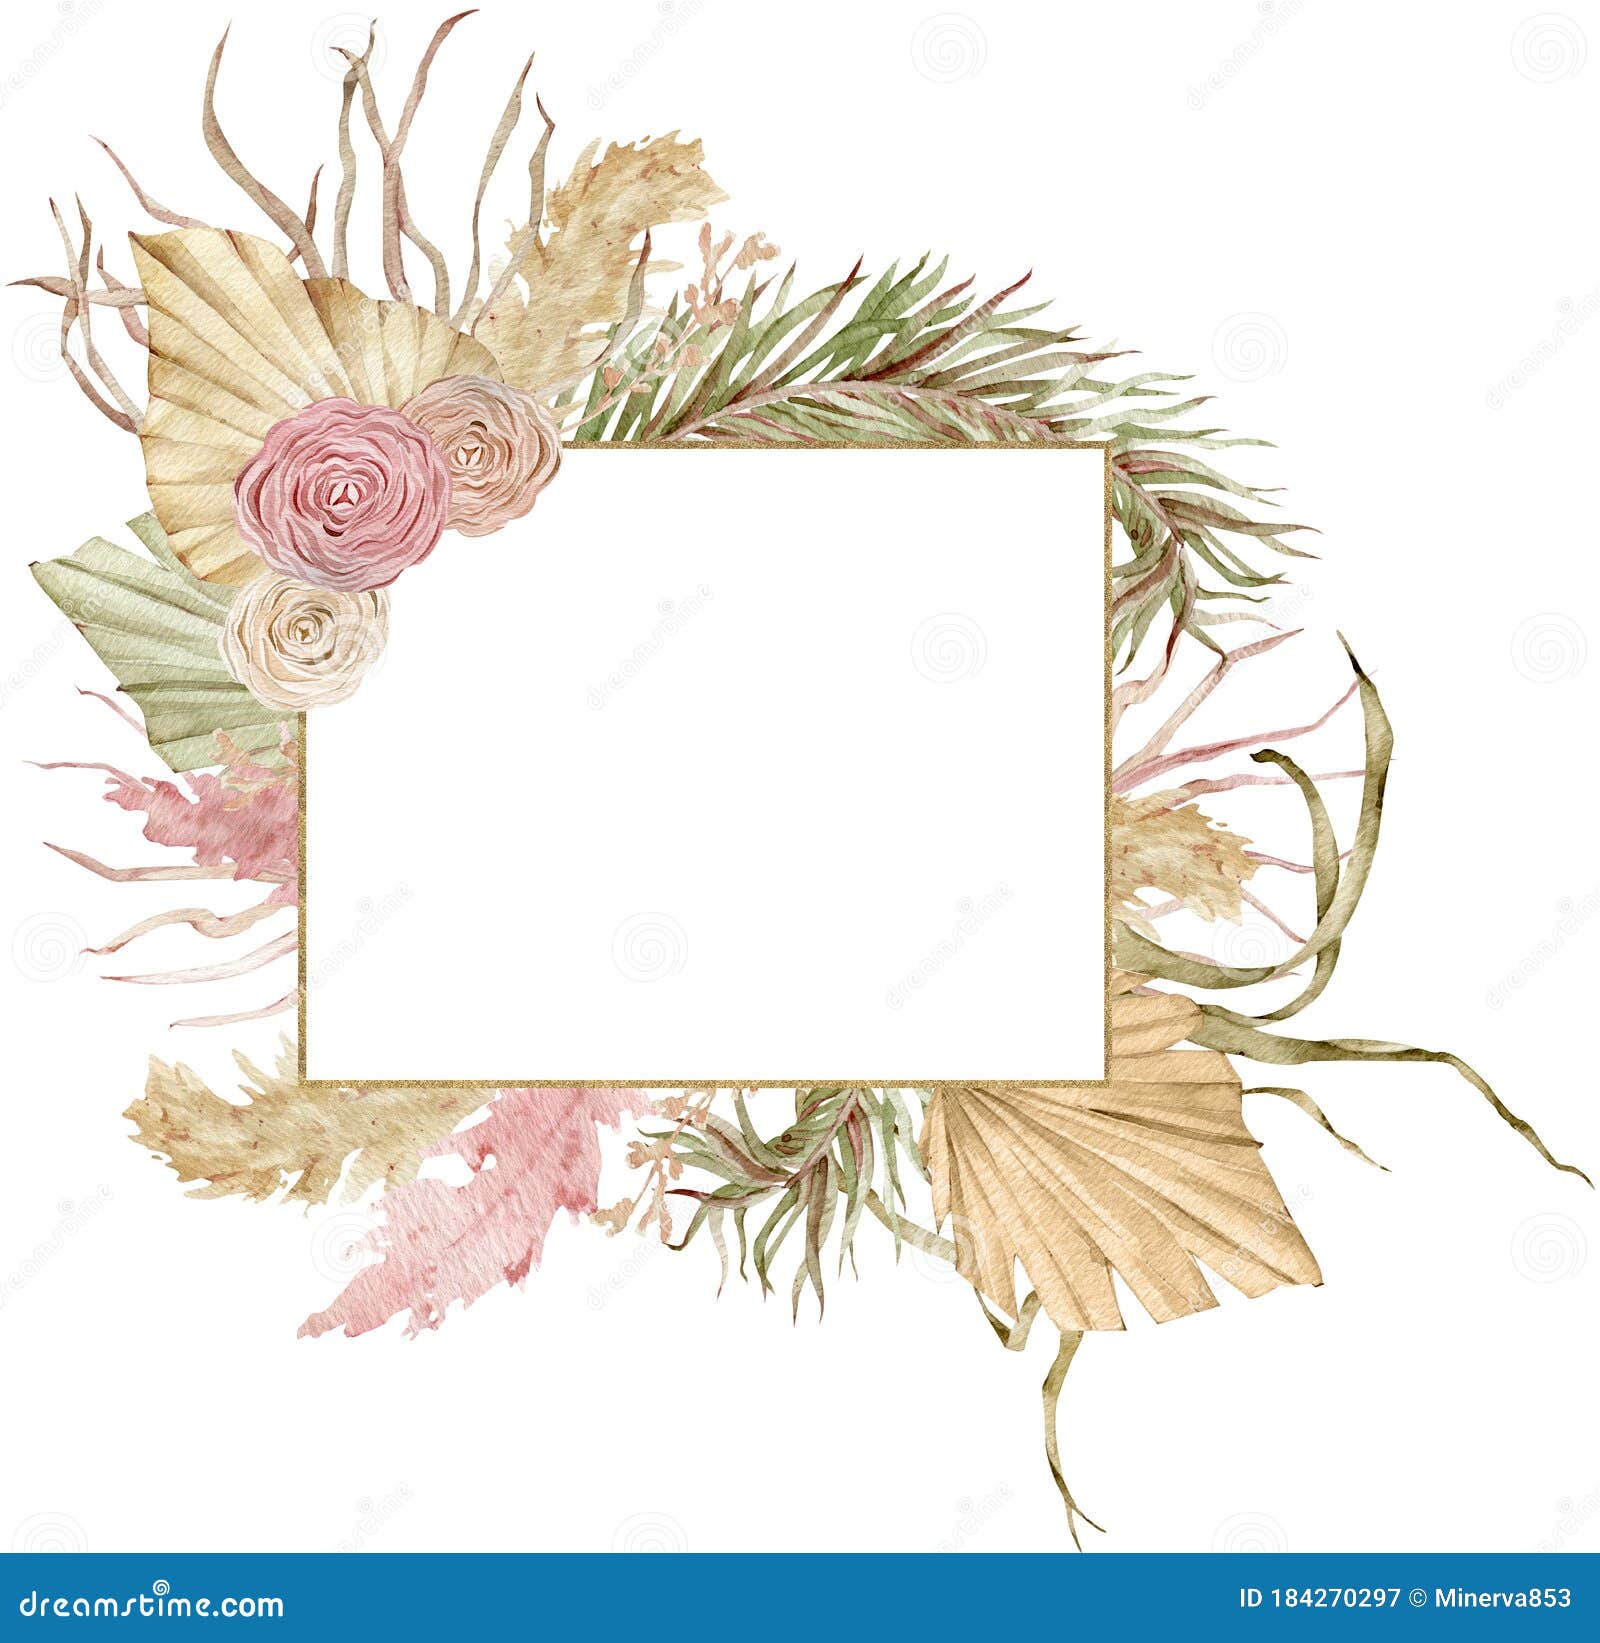 Palm Leaves Floral Wedding Clipart Tropical Rose Gold Frame Earthy Tone Beige Roses Watercolor Flowers Boho Floral Frame Dried Leaves